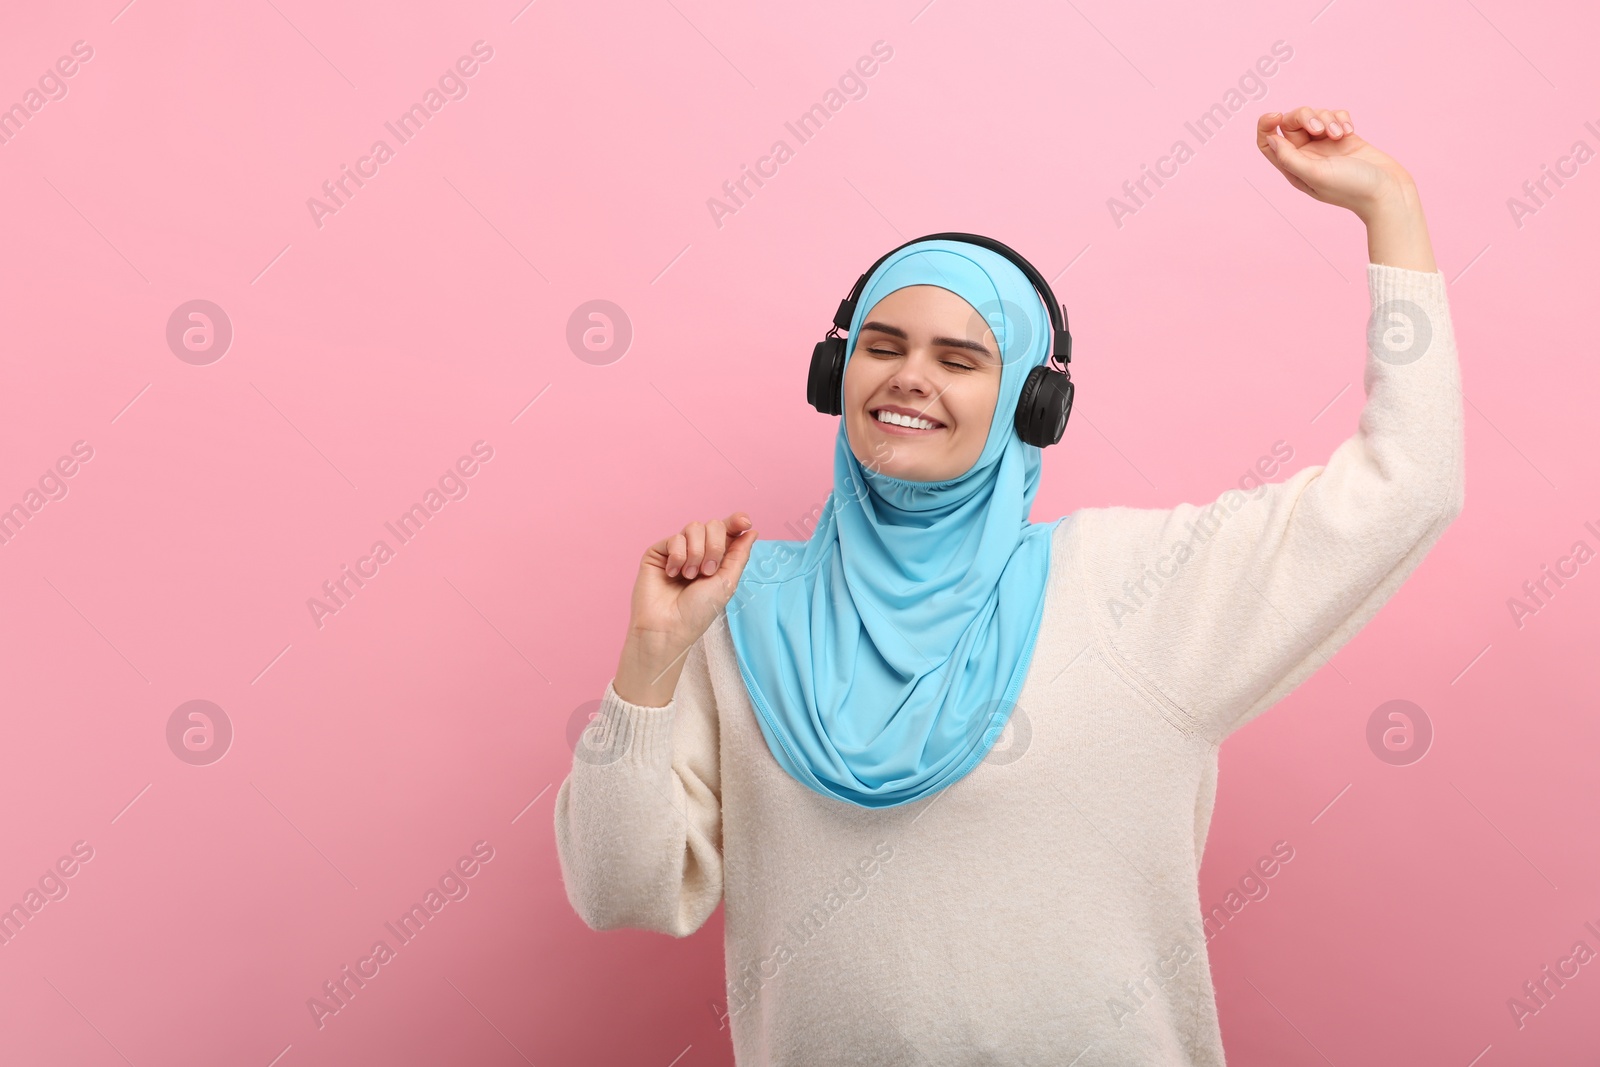 Photo of Muslim woman in hijab and headphones listening to music on pink background, space for text